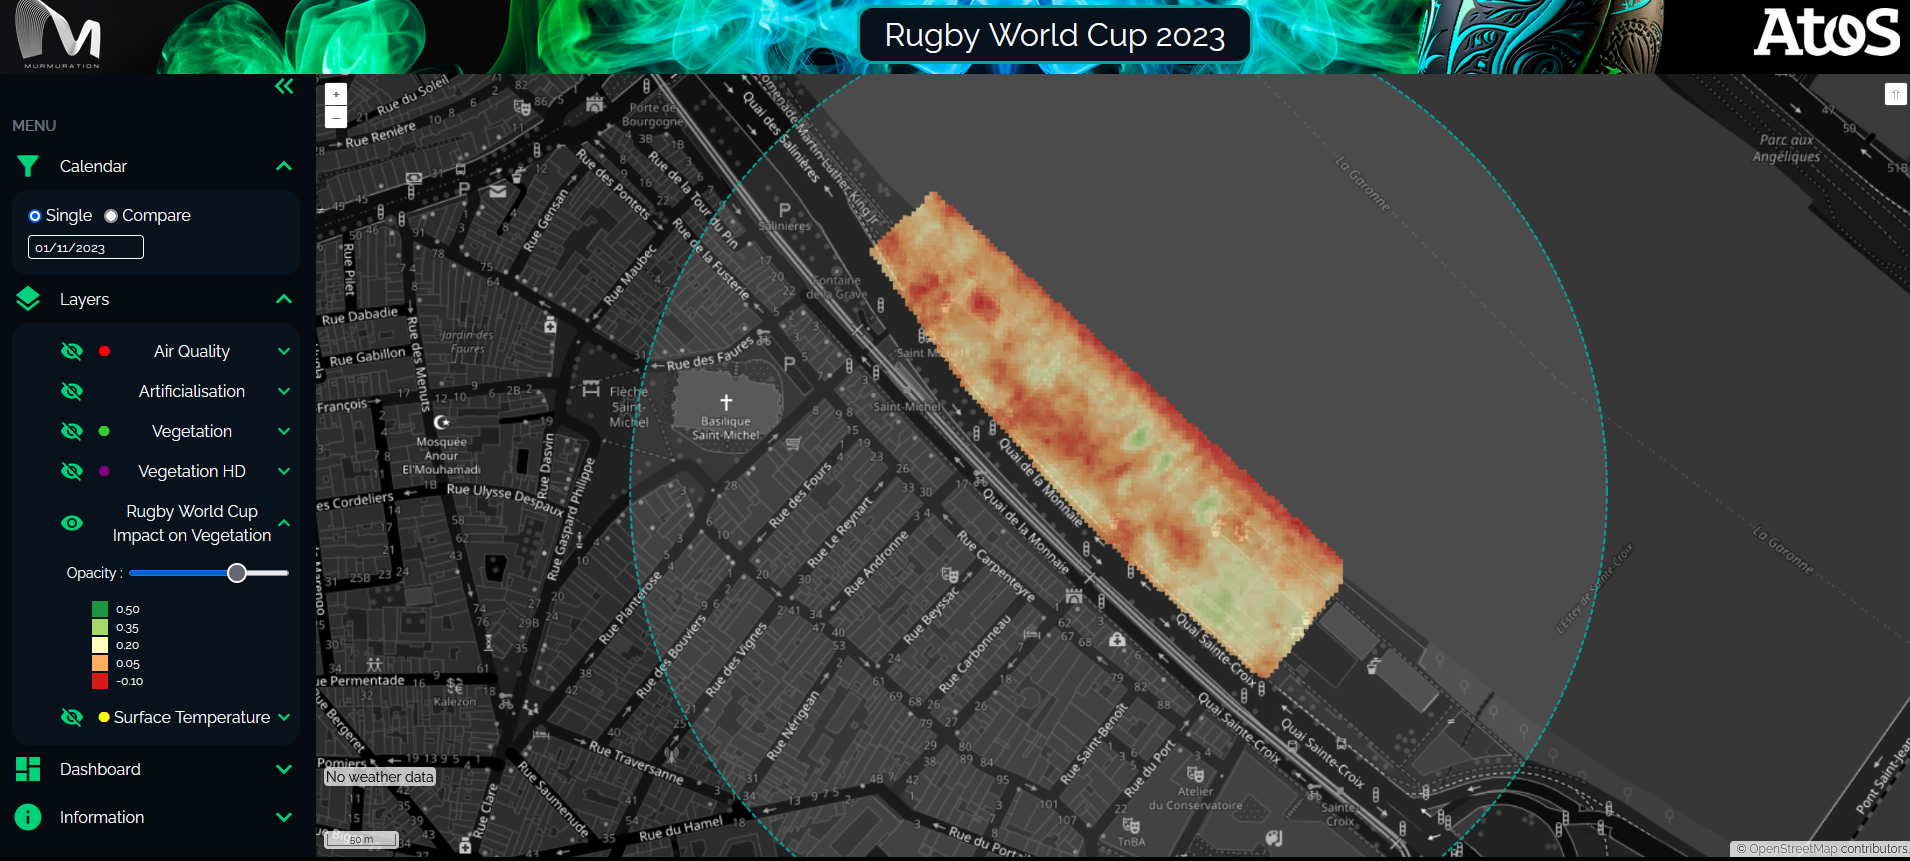 Rugby World Cup proof-of-concept